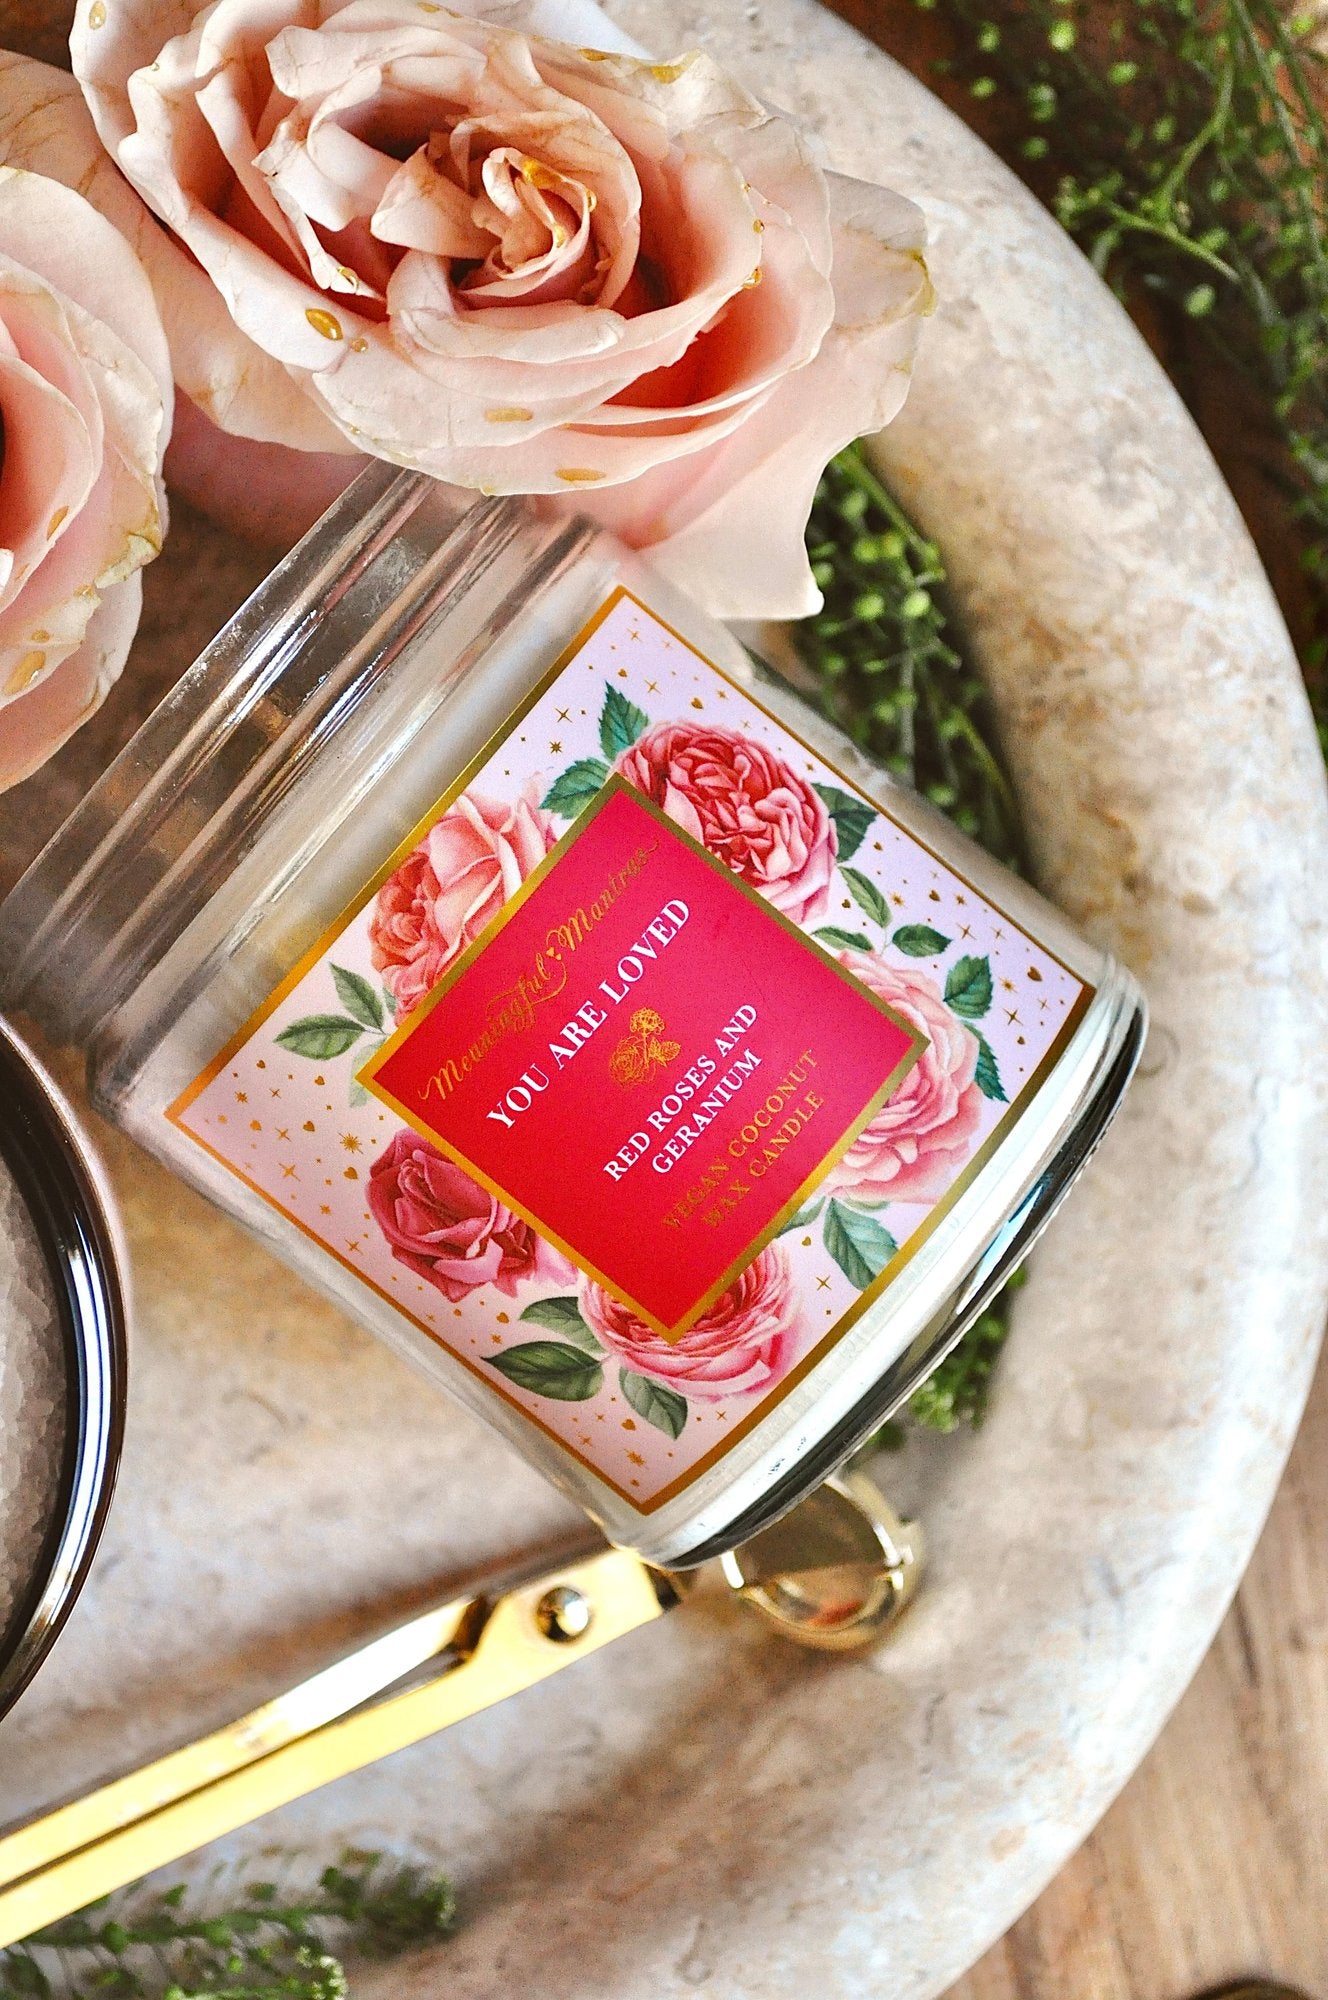 You Are Loved Rose Geranium Candle